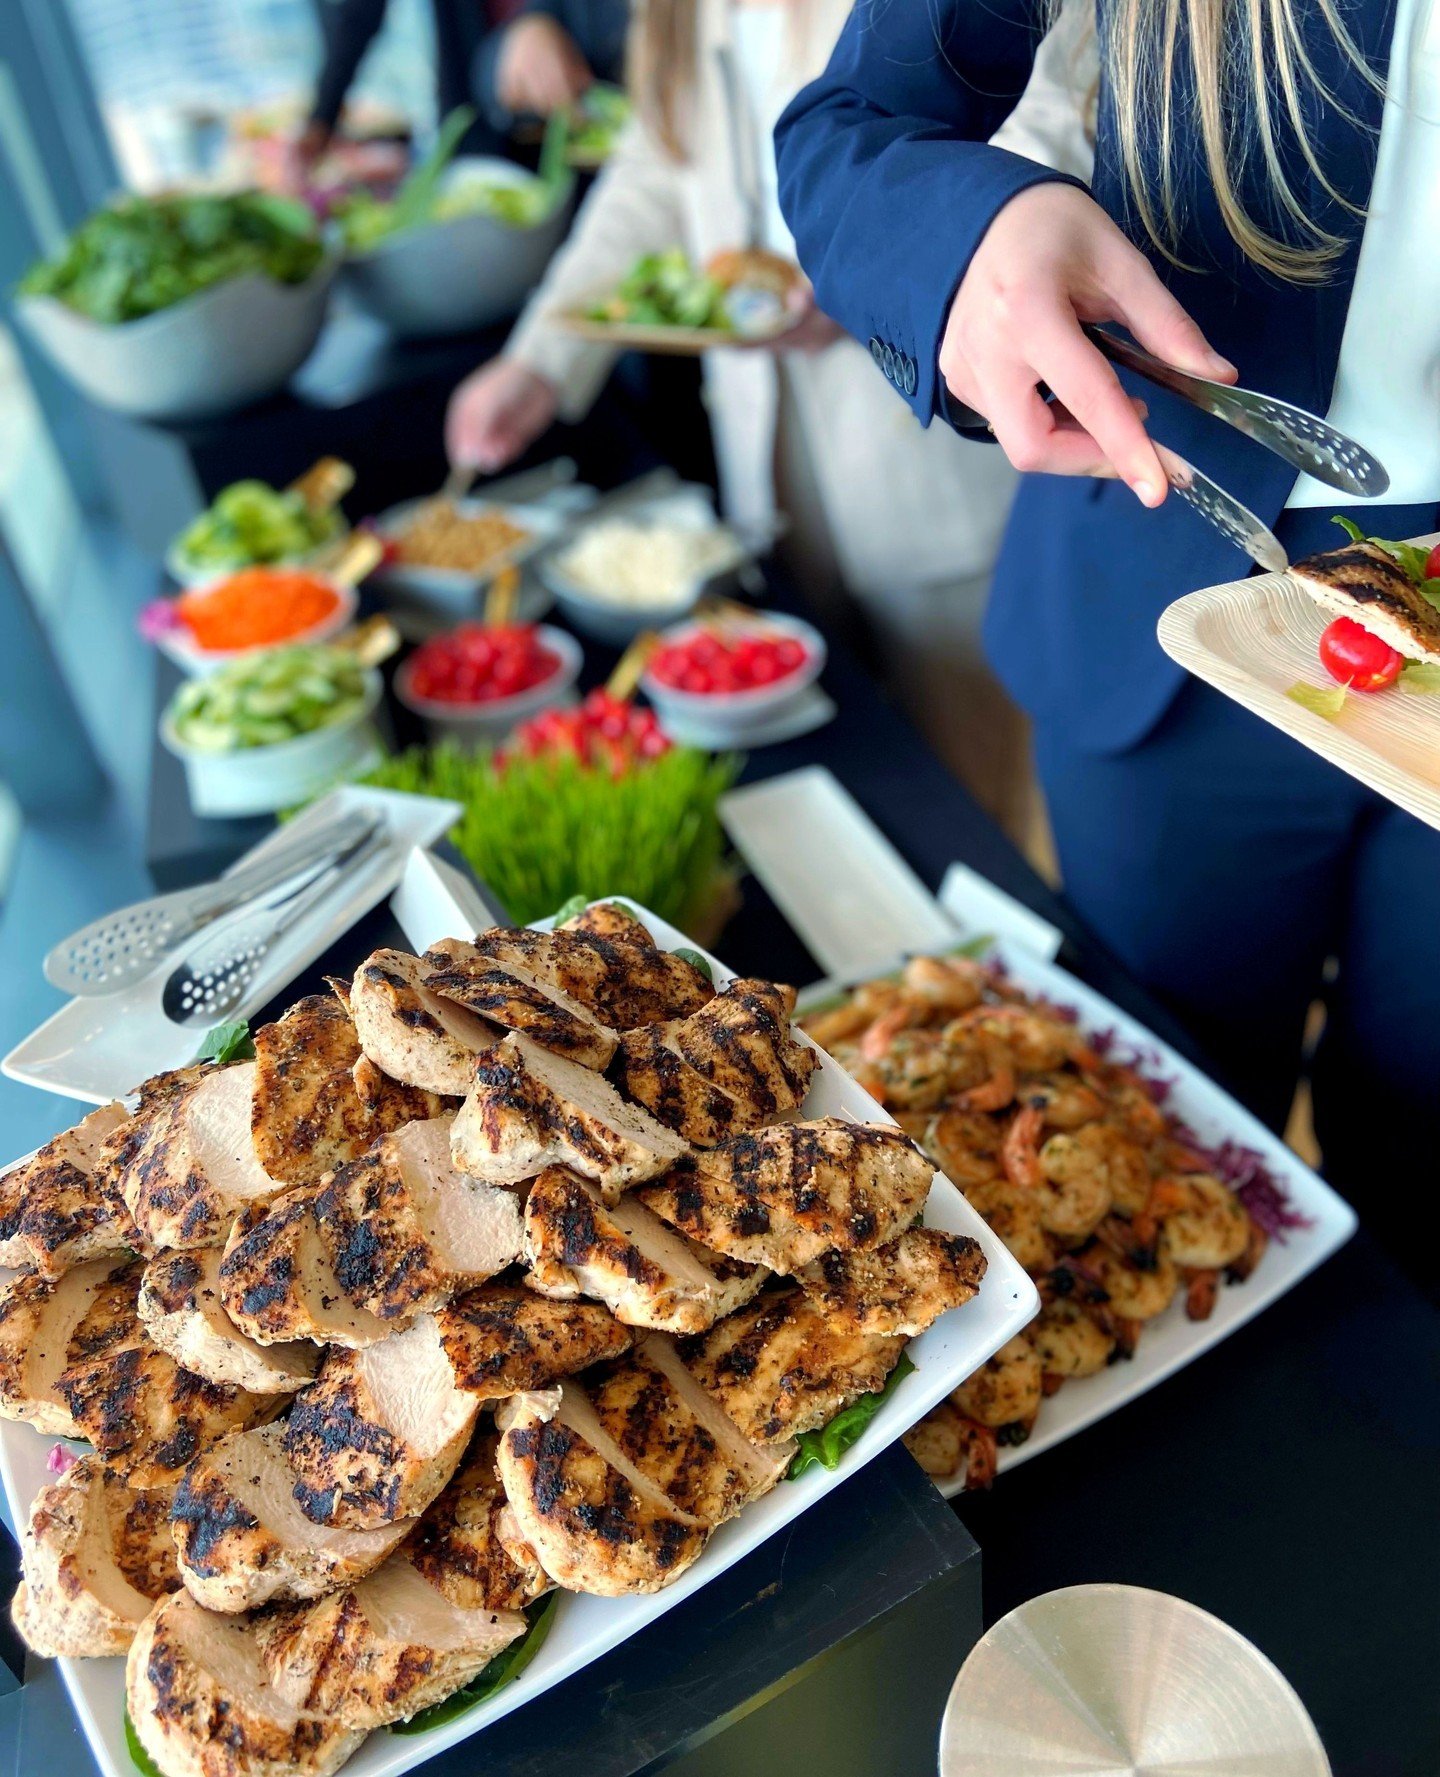 We long to serve you and your guests locally grown, sustainable &amp; clean delicious cuisine. Call us today to find out how we can provide for your next event.